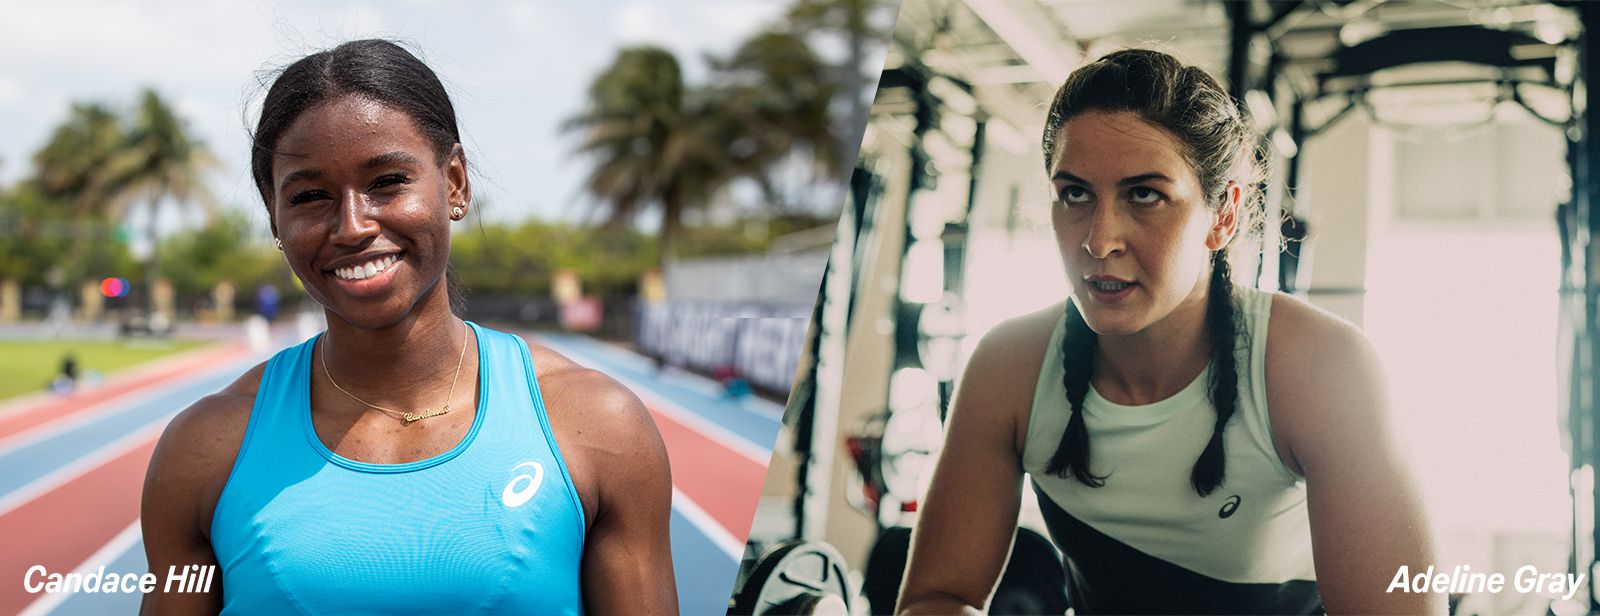 ASICS Athletes Candace Hill And Adeline Gray